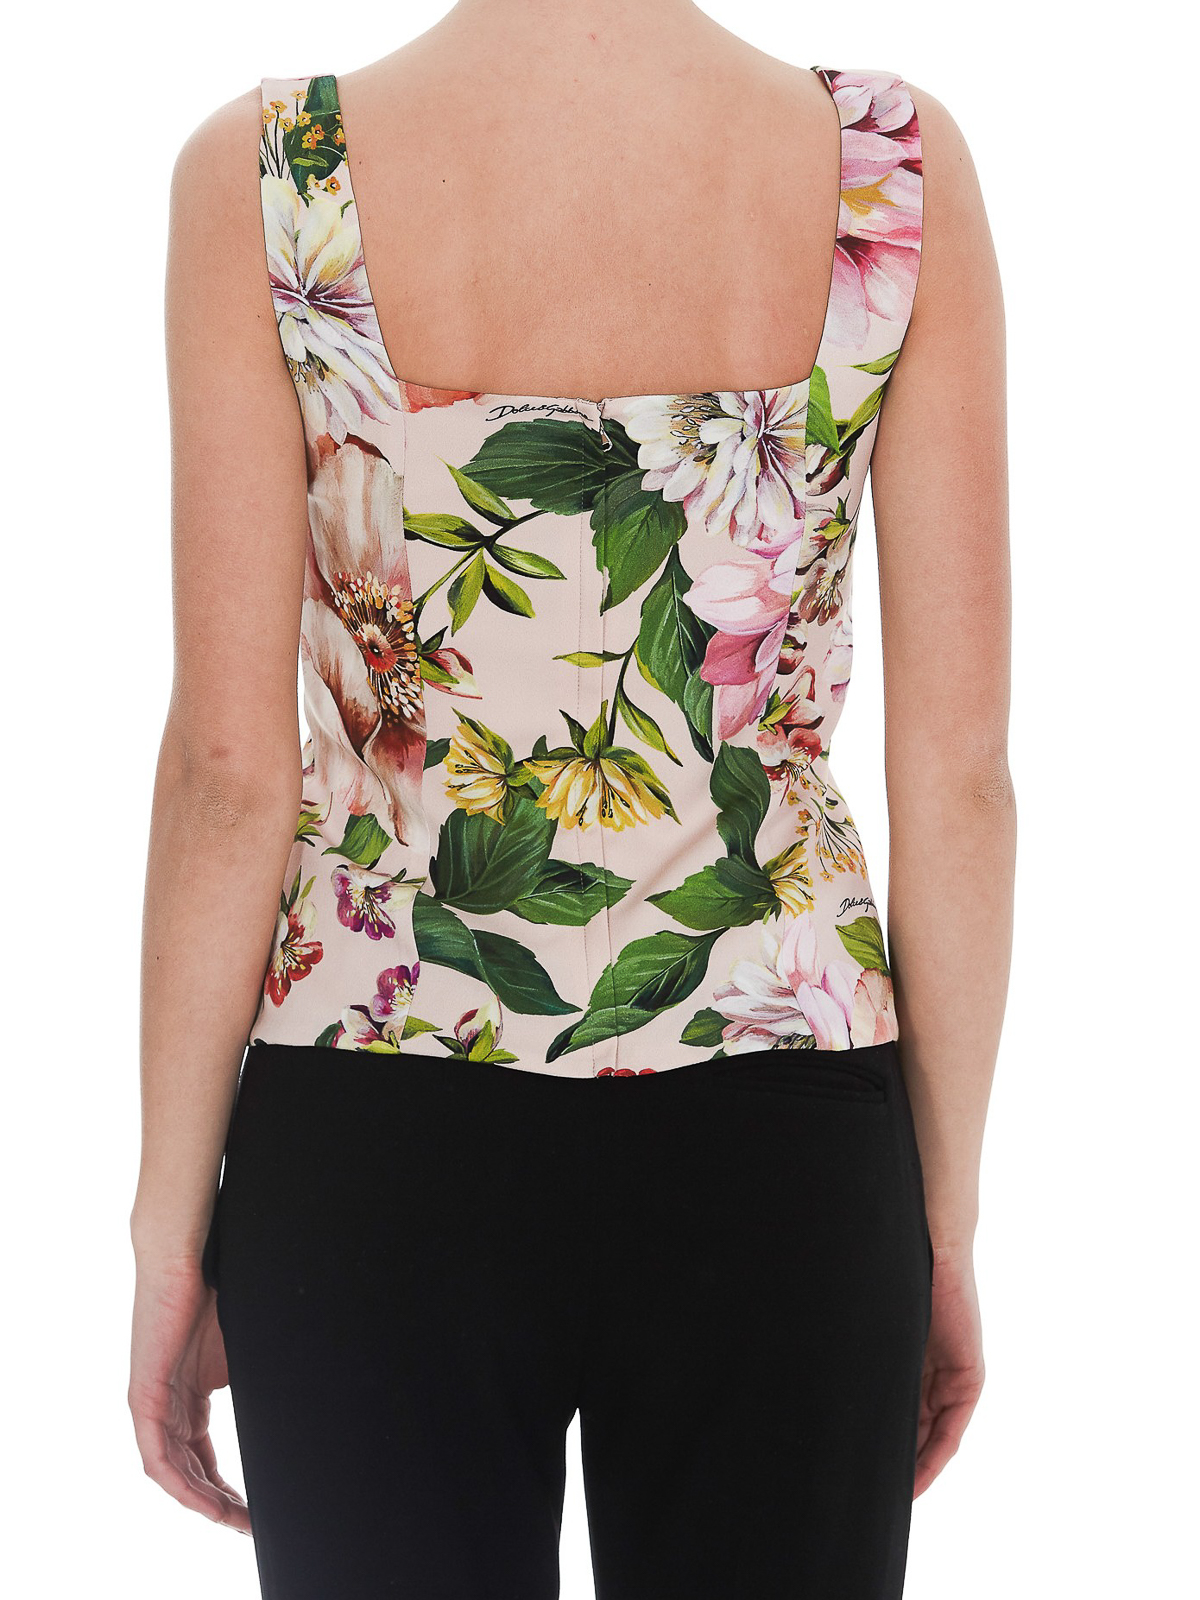 Dolce & Gabbana Floral Print Charmeuse in Black Womens Tops Dolce & Gabbana Tops Save 10% 